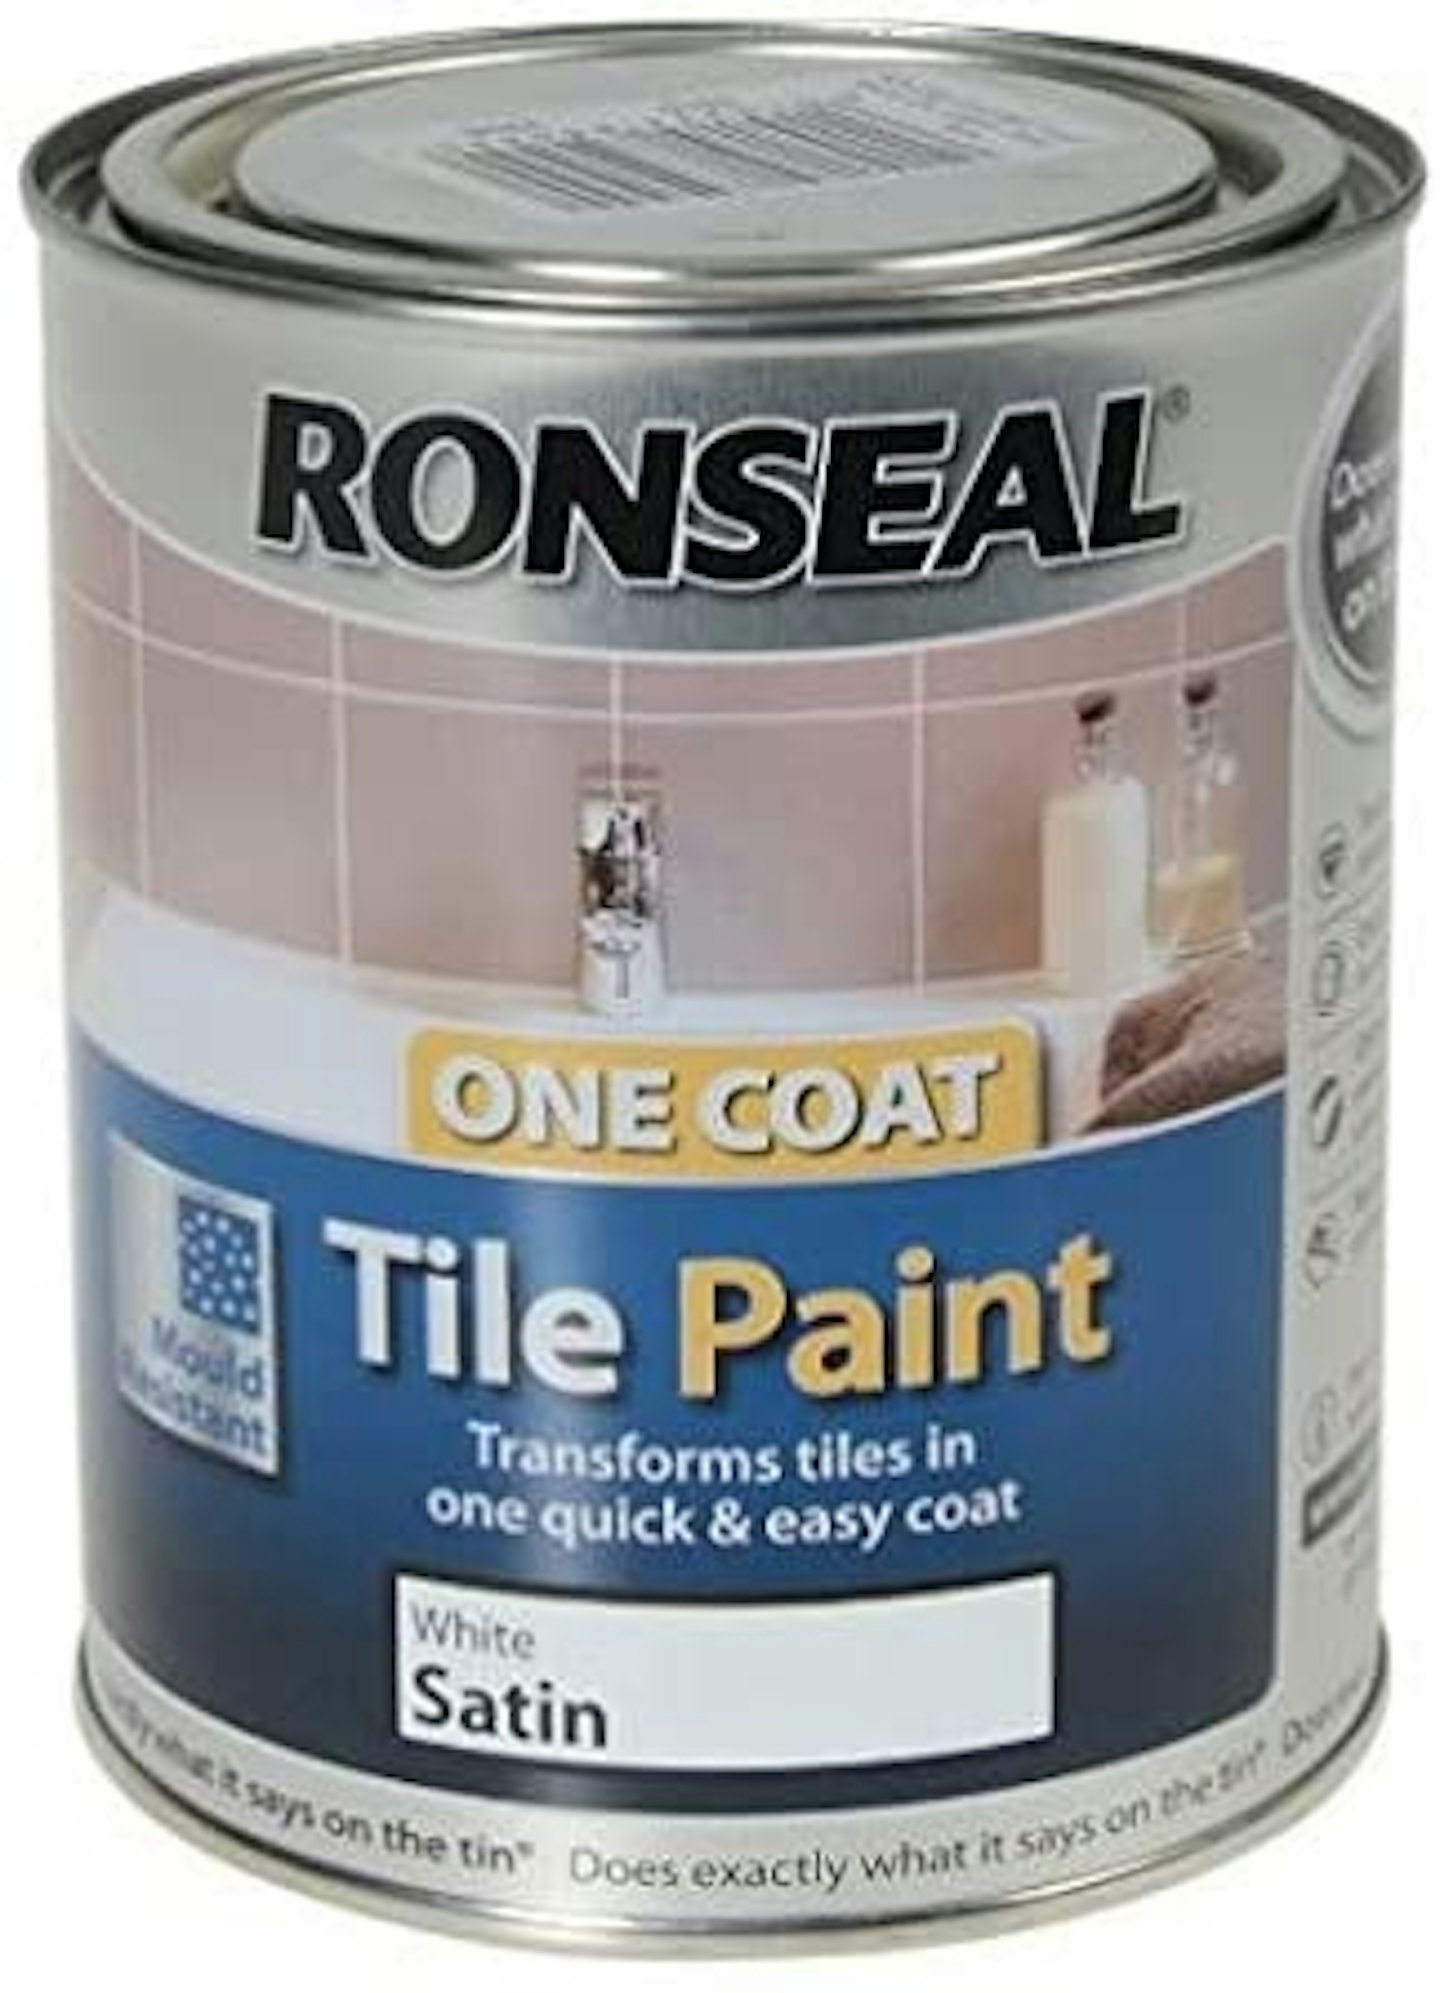 A tin of Ronseal tile paint